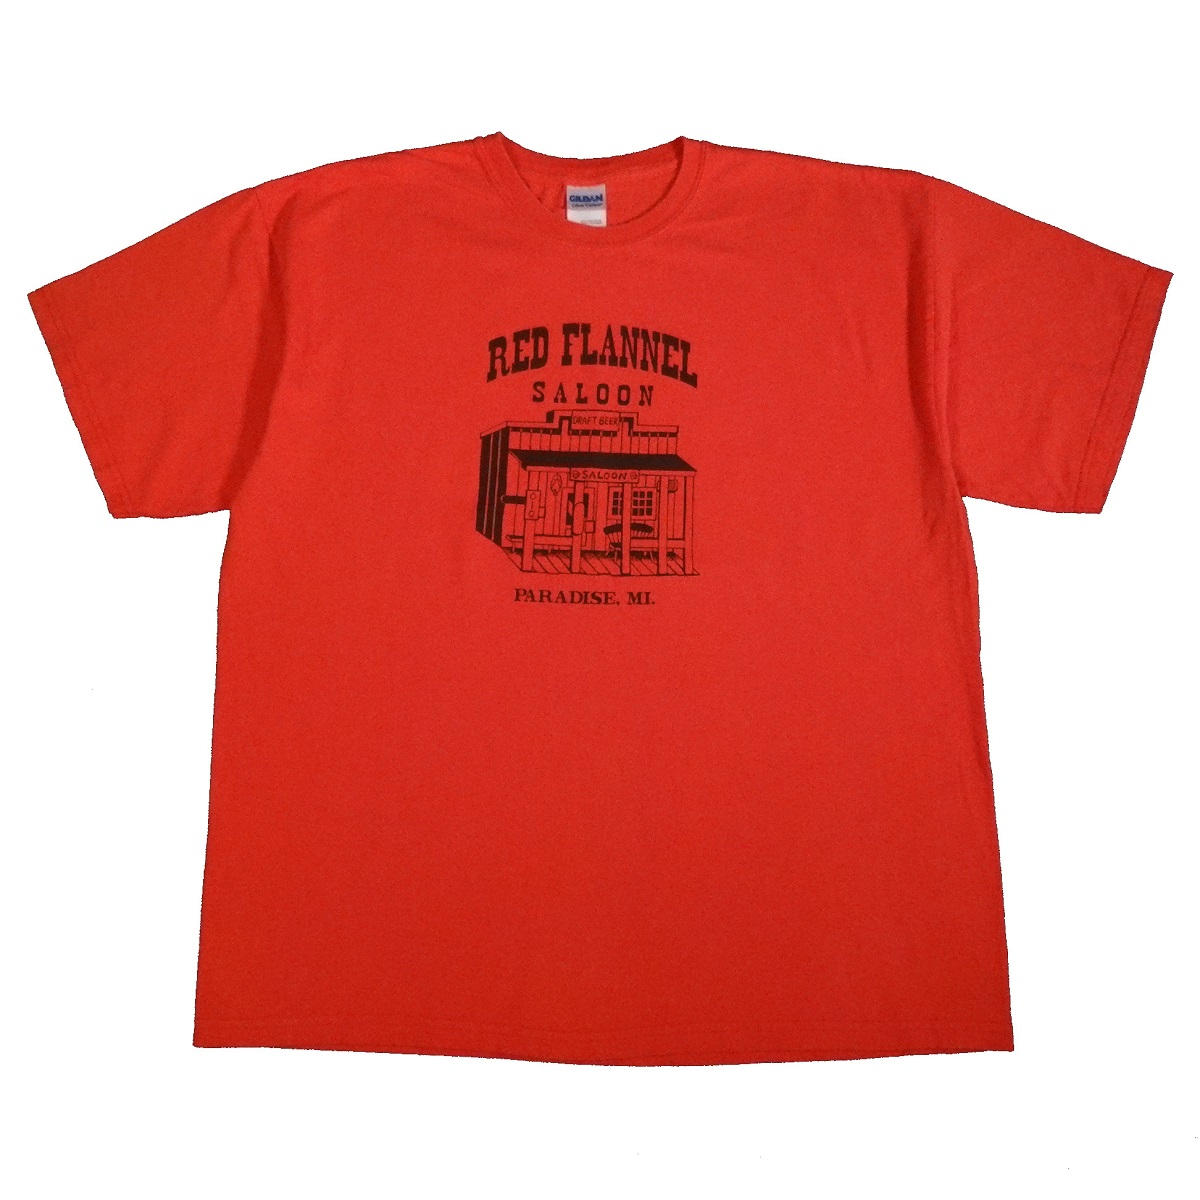 red flannel saloon t shirt paradise michigan front